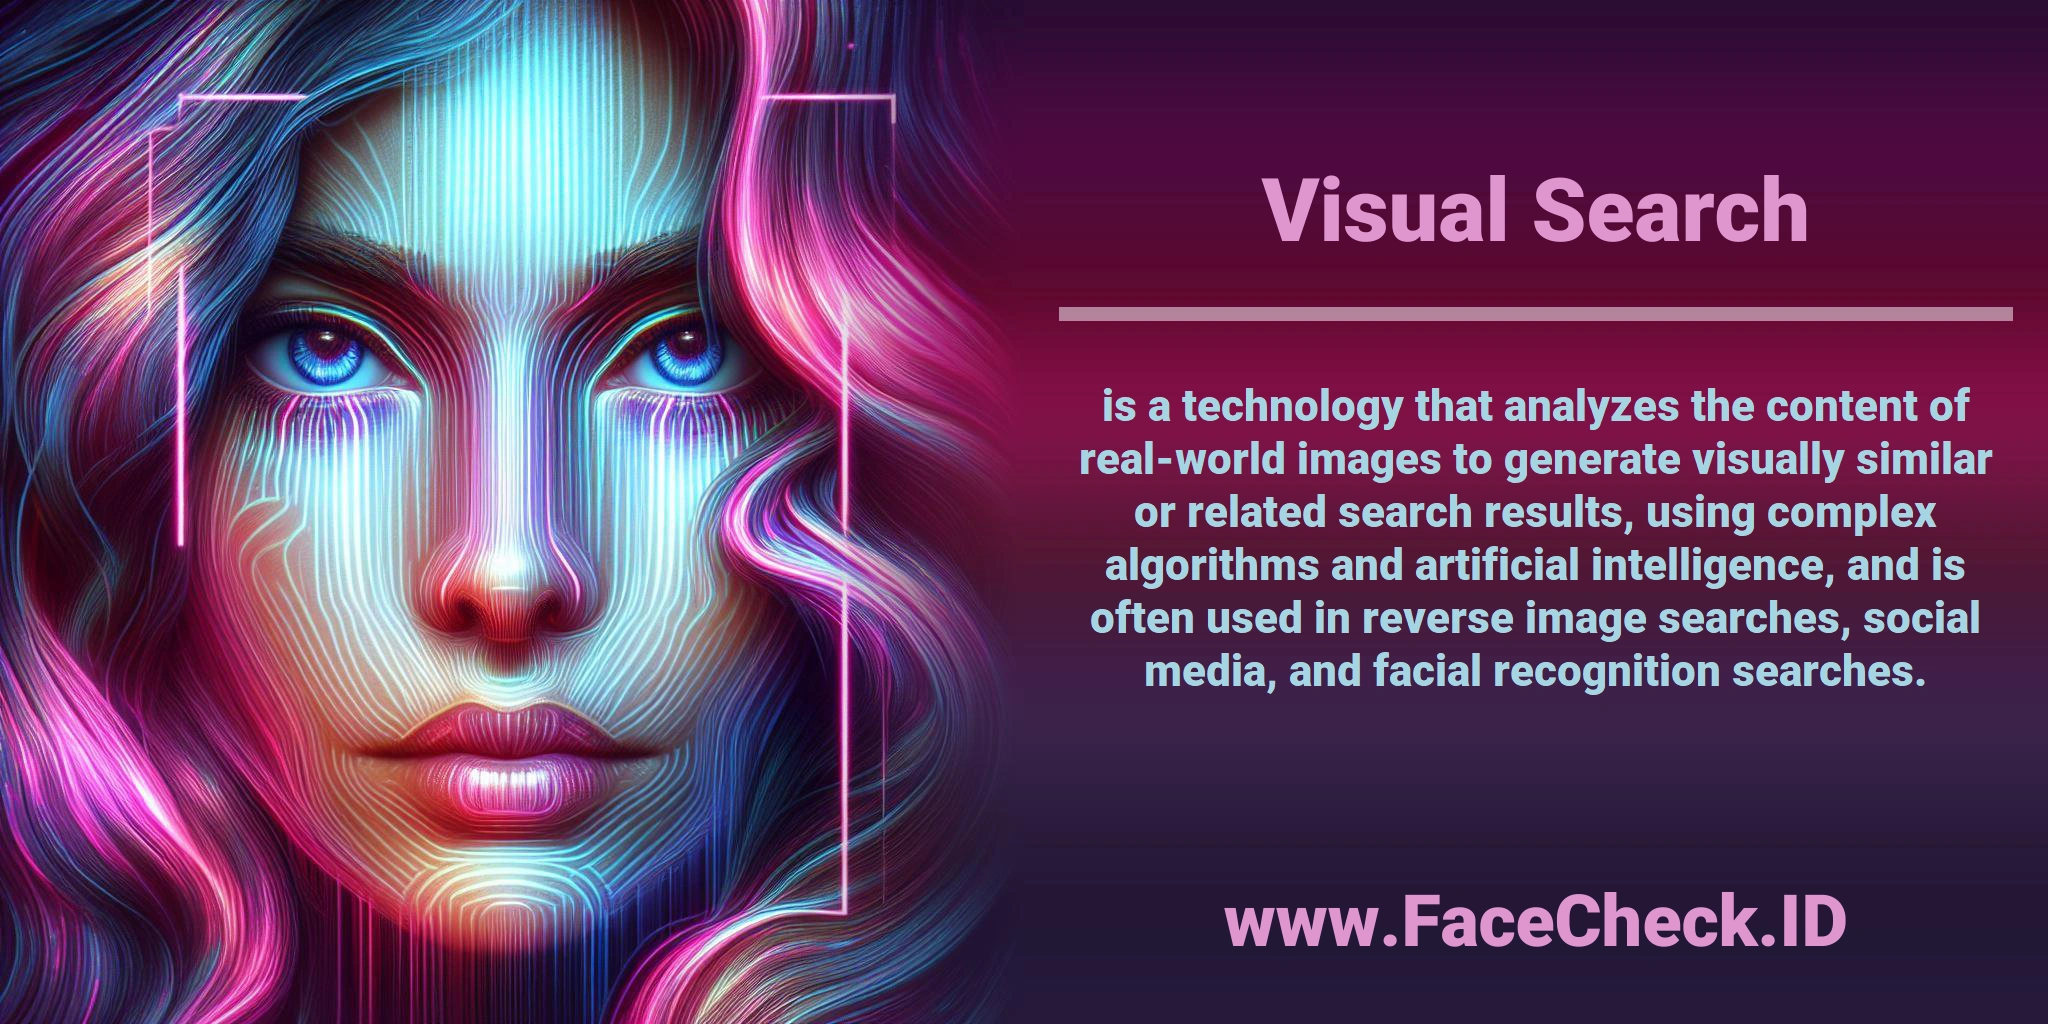 <b>Visual Search</b> is a technology that analyzes the content of real-world images to generate visually similar or related search results, using complex algorithms and artificial intelligence, and is often used in reverse image searches, social media, and facial recognition searches.